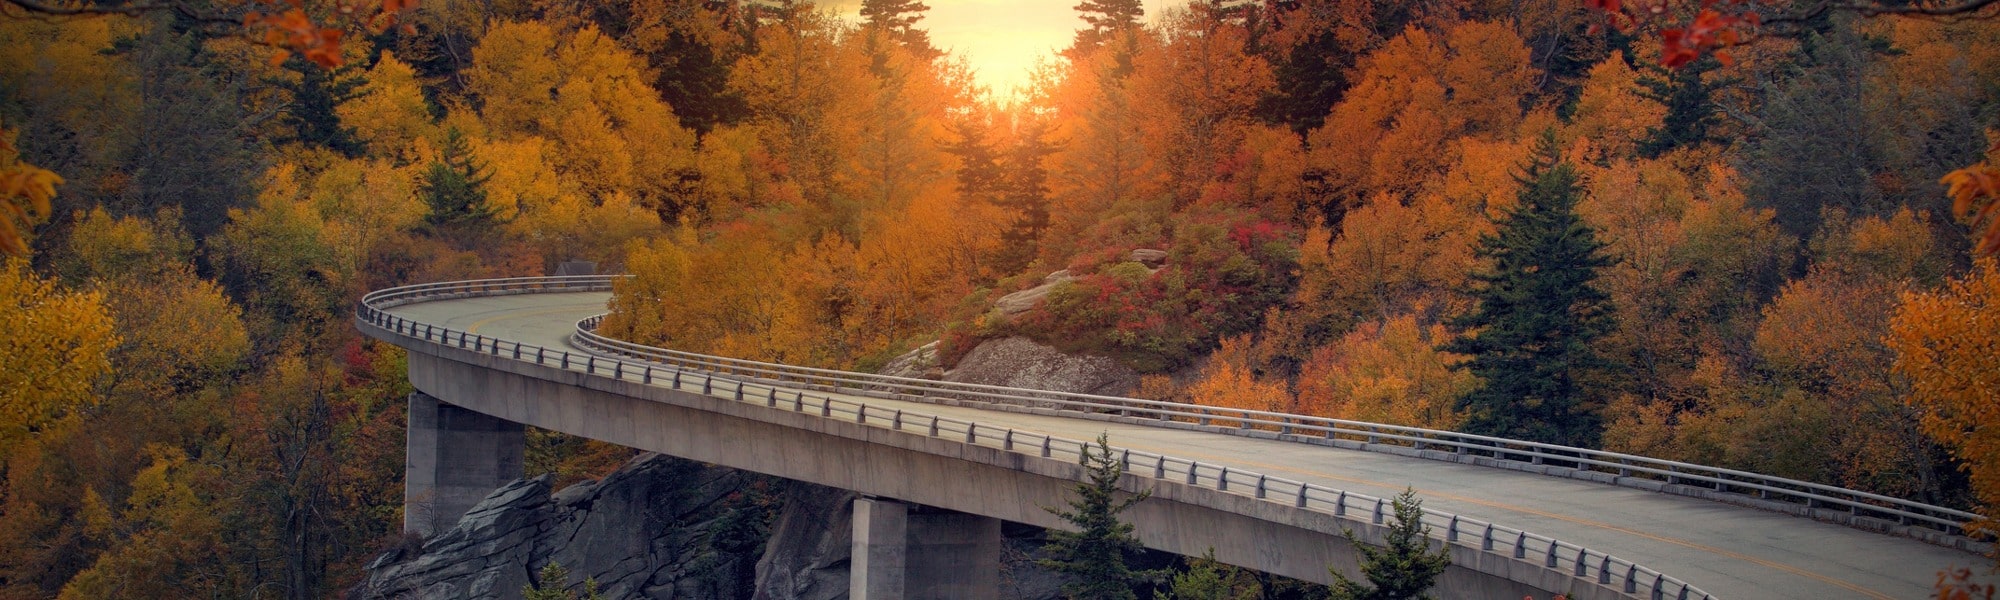 Scenic photo of a highway winding through a curvy, forested area